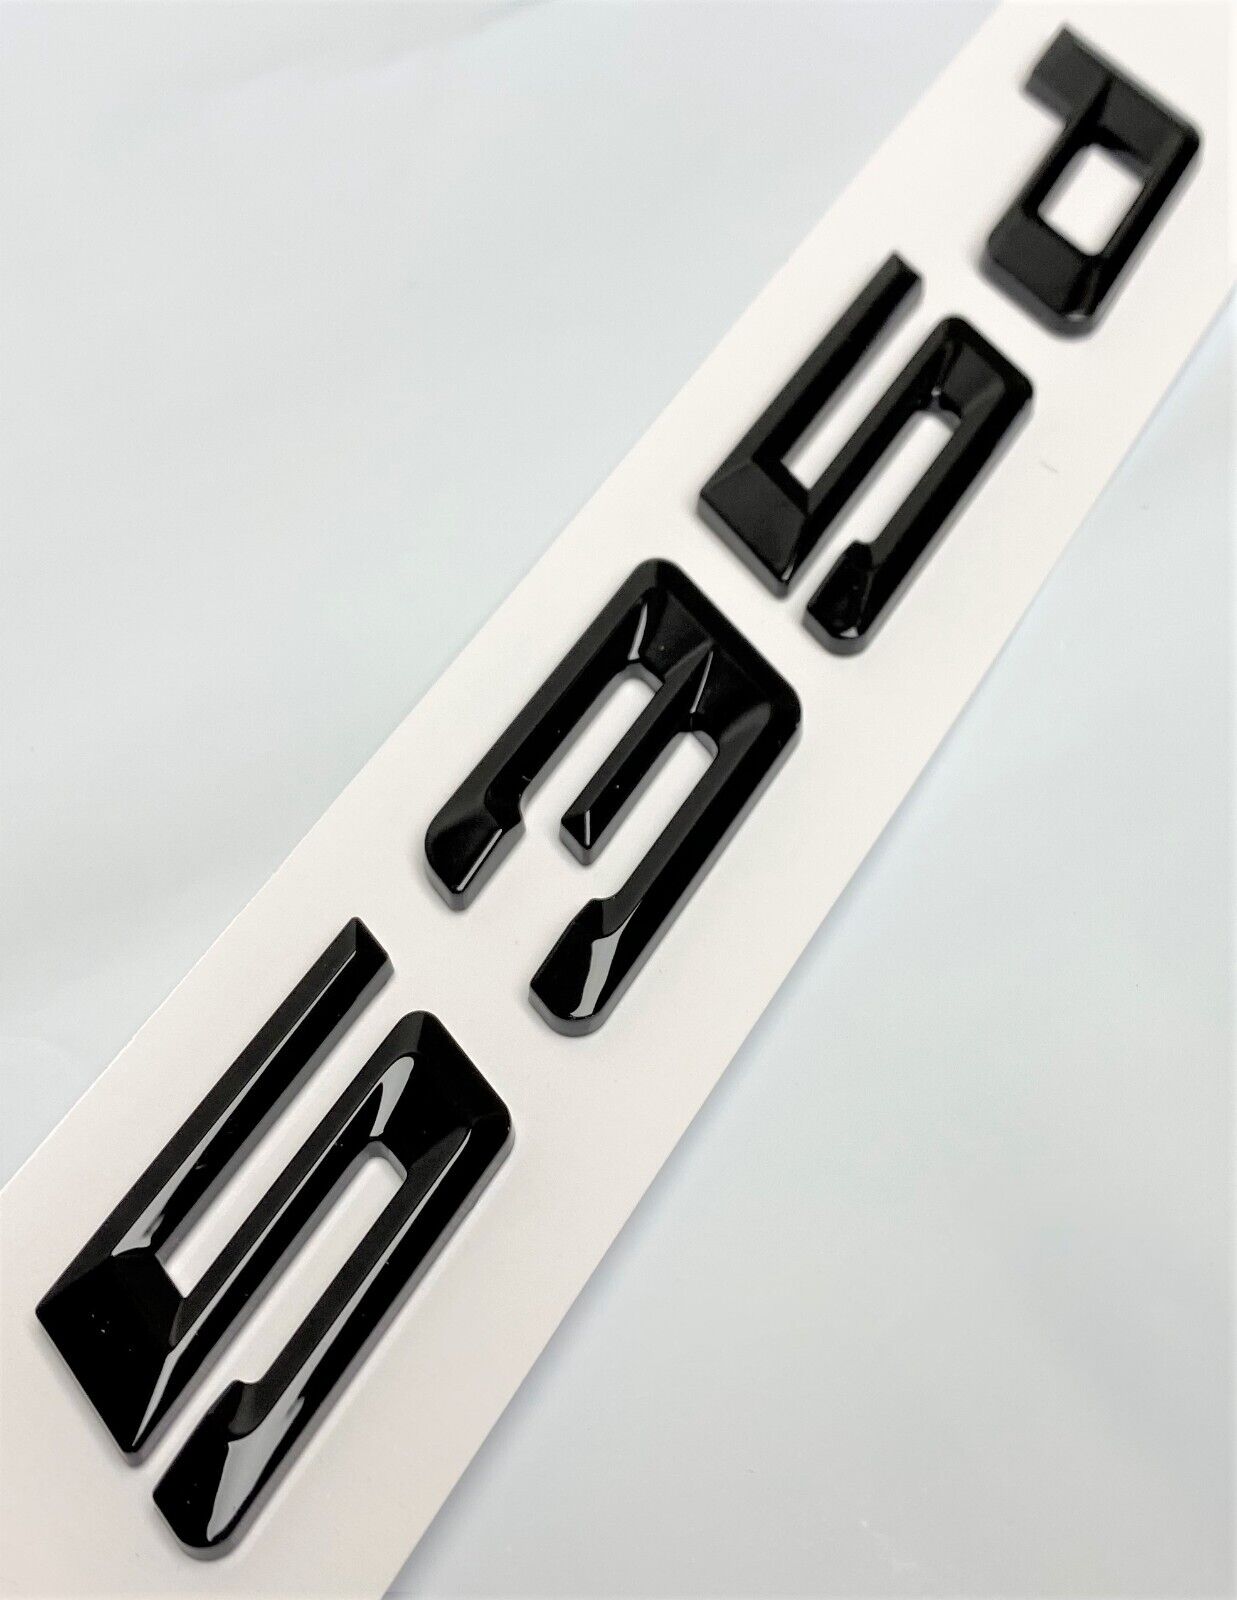 BLACK 535d FIT BMW 535d REAR TRUNK NAMEPLATE EMBLEM BADGE NUMBERS DECAL NAME